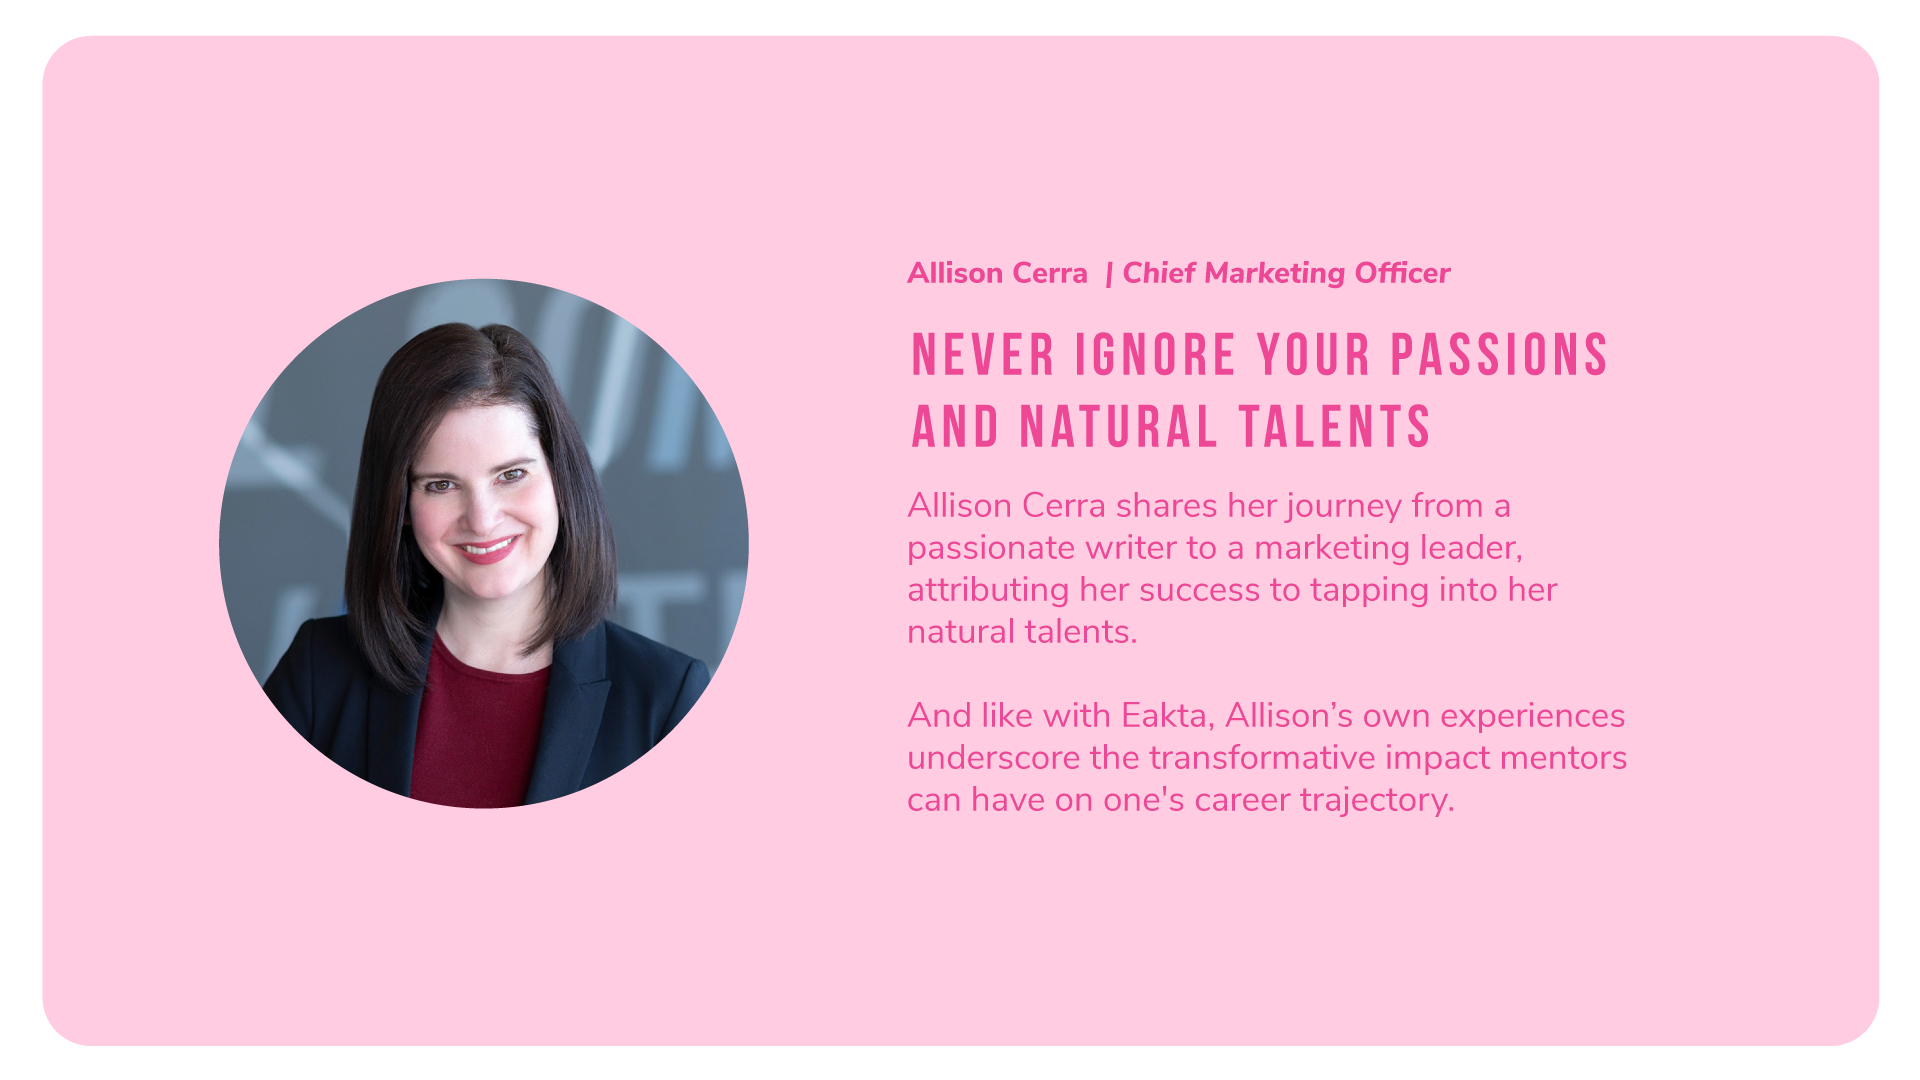 Allison Cerra of Alkami says: Never ignore your passions and natural talents